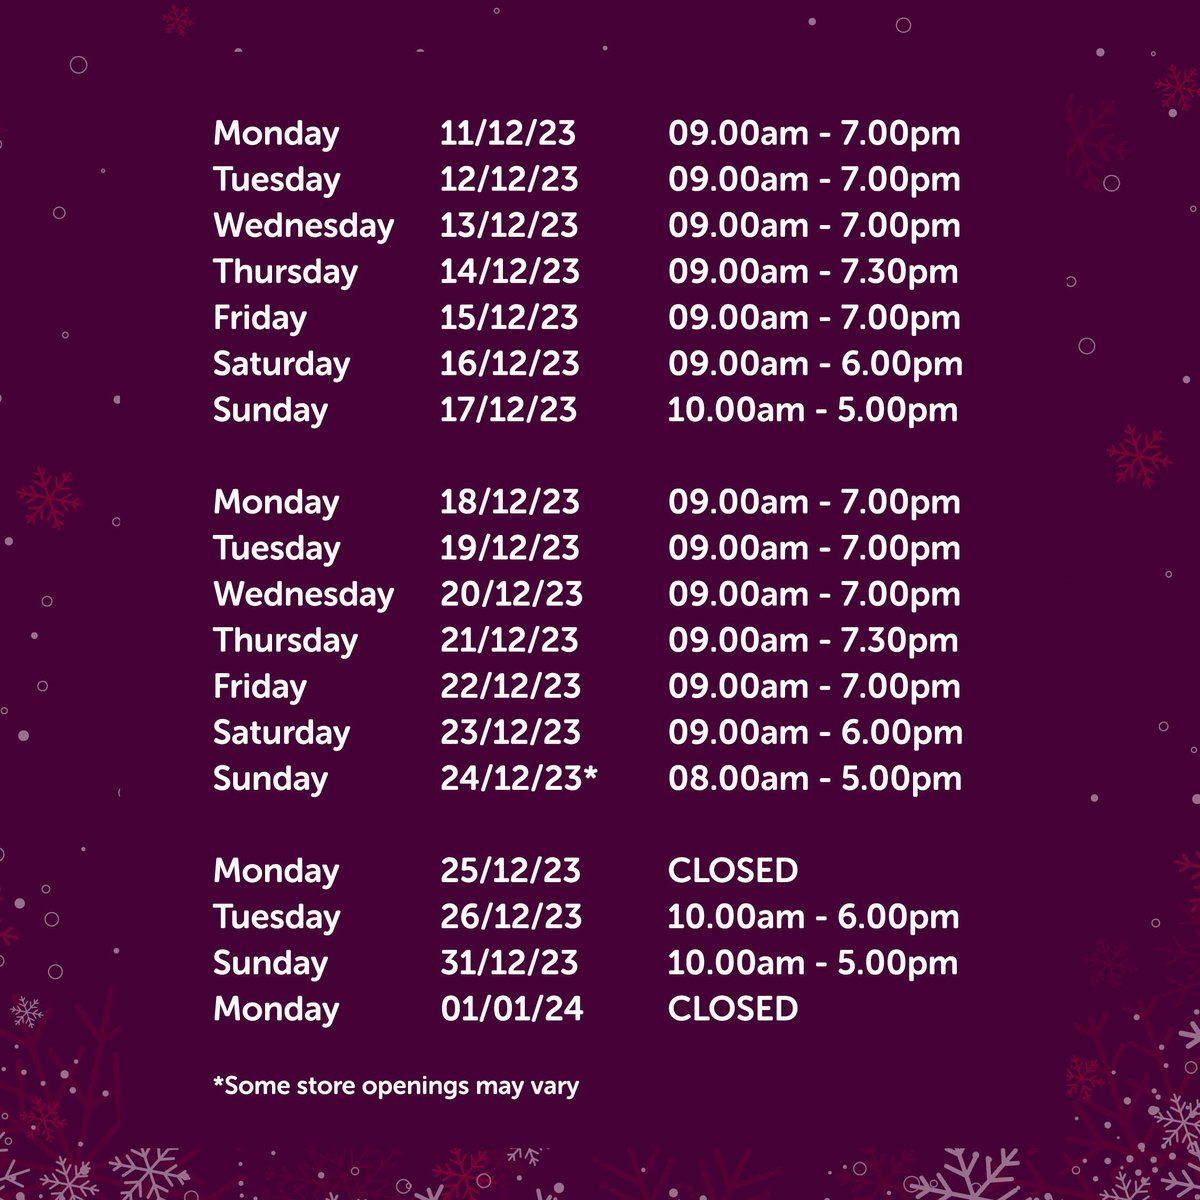 Announcement. Overgate Christmas Opening Hours. #DiscoverDundee #DiscoverOvergate #DiscoverThePerfectGift *Some store opening hours may vary.